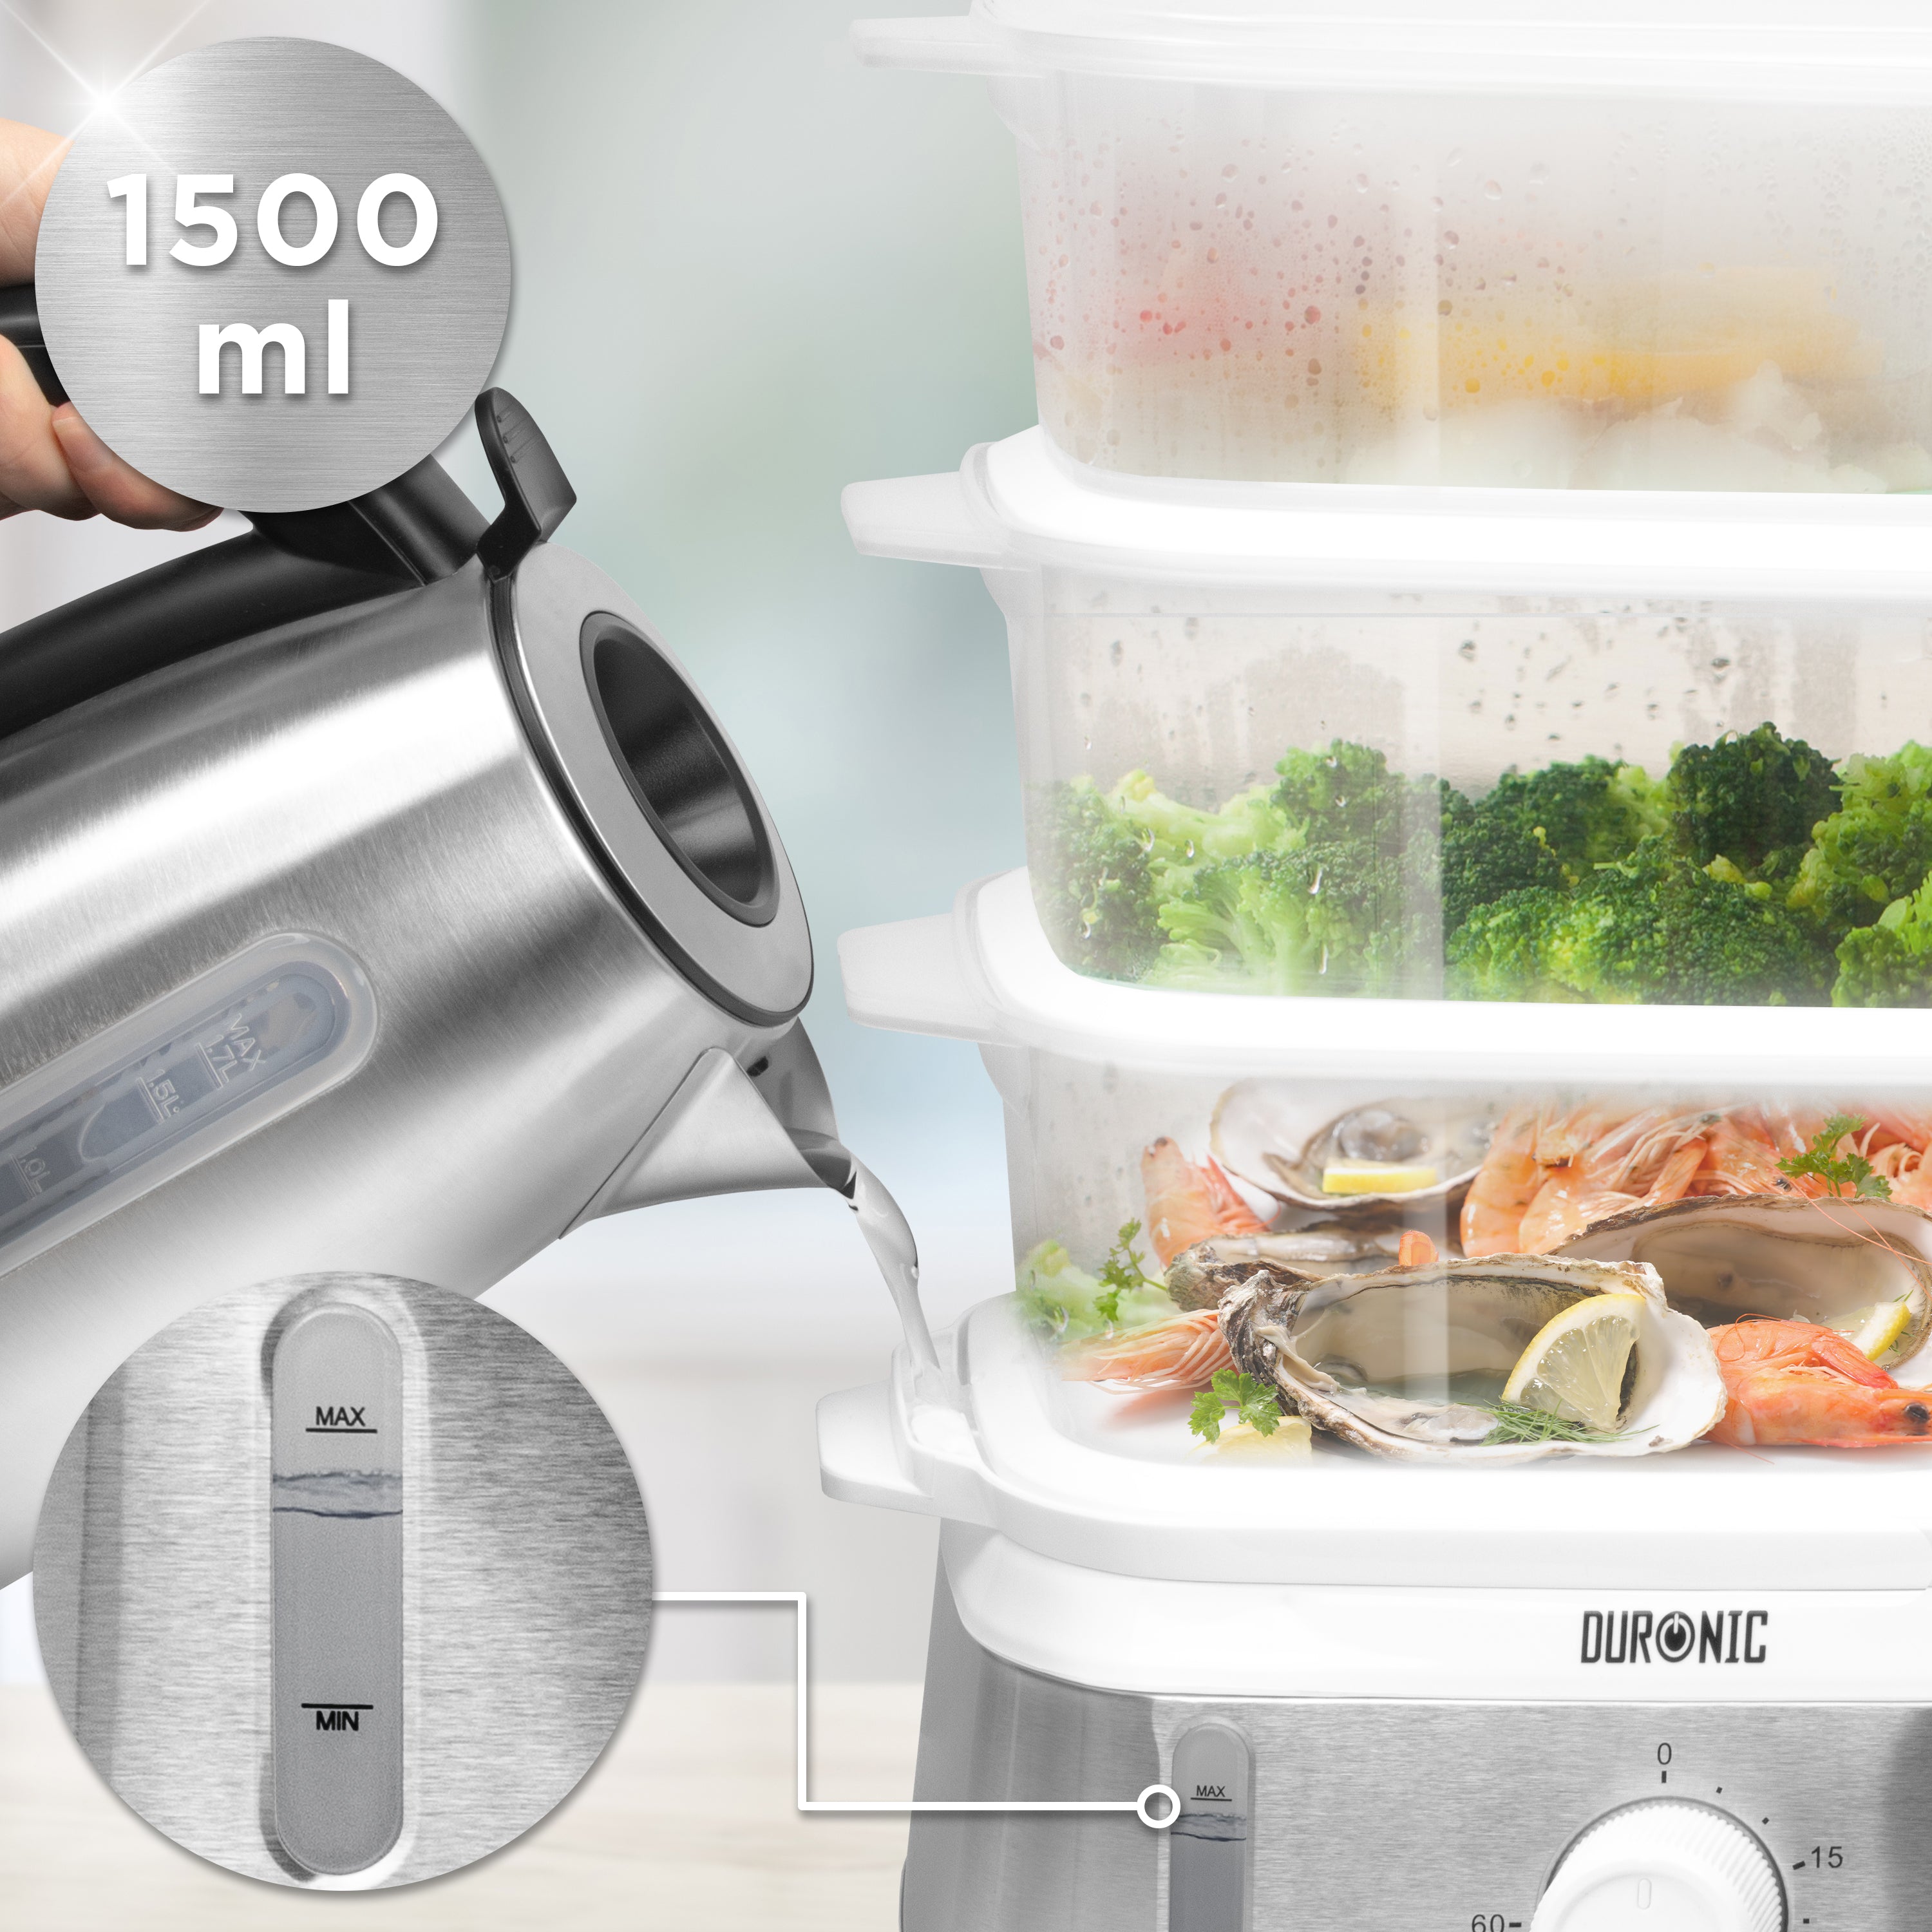 Duronic Food Steamer FS95, 3 Tier Electric Food Steamer, 9L Stackable Baskets with Rice Bowl, 60 Minute Timer, BPA Free 900W Vegetable, Meat, Fish and Dumpling Steamer